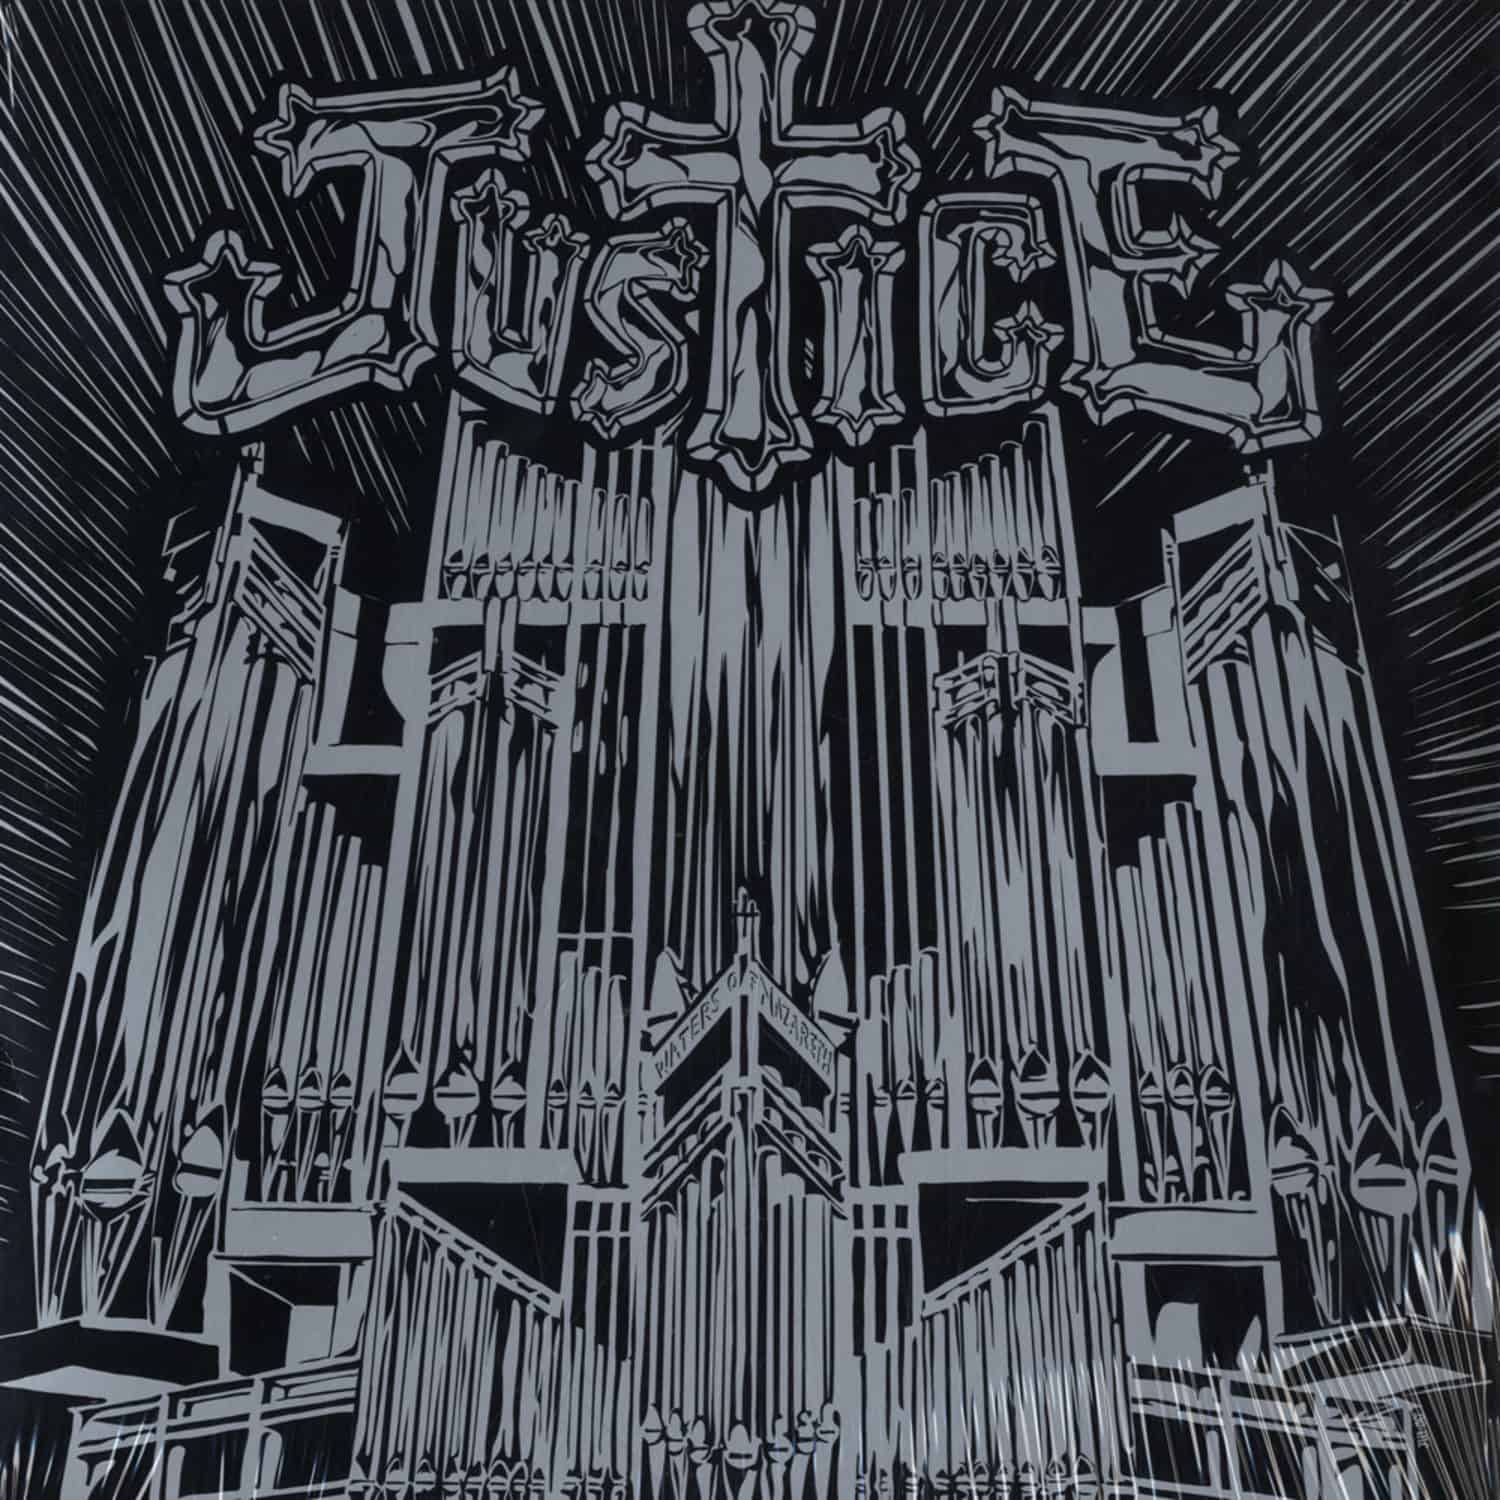 Justice - WATERS OF NAZARETH / LET THERE BE LIGHT / CAPATES